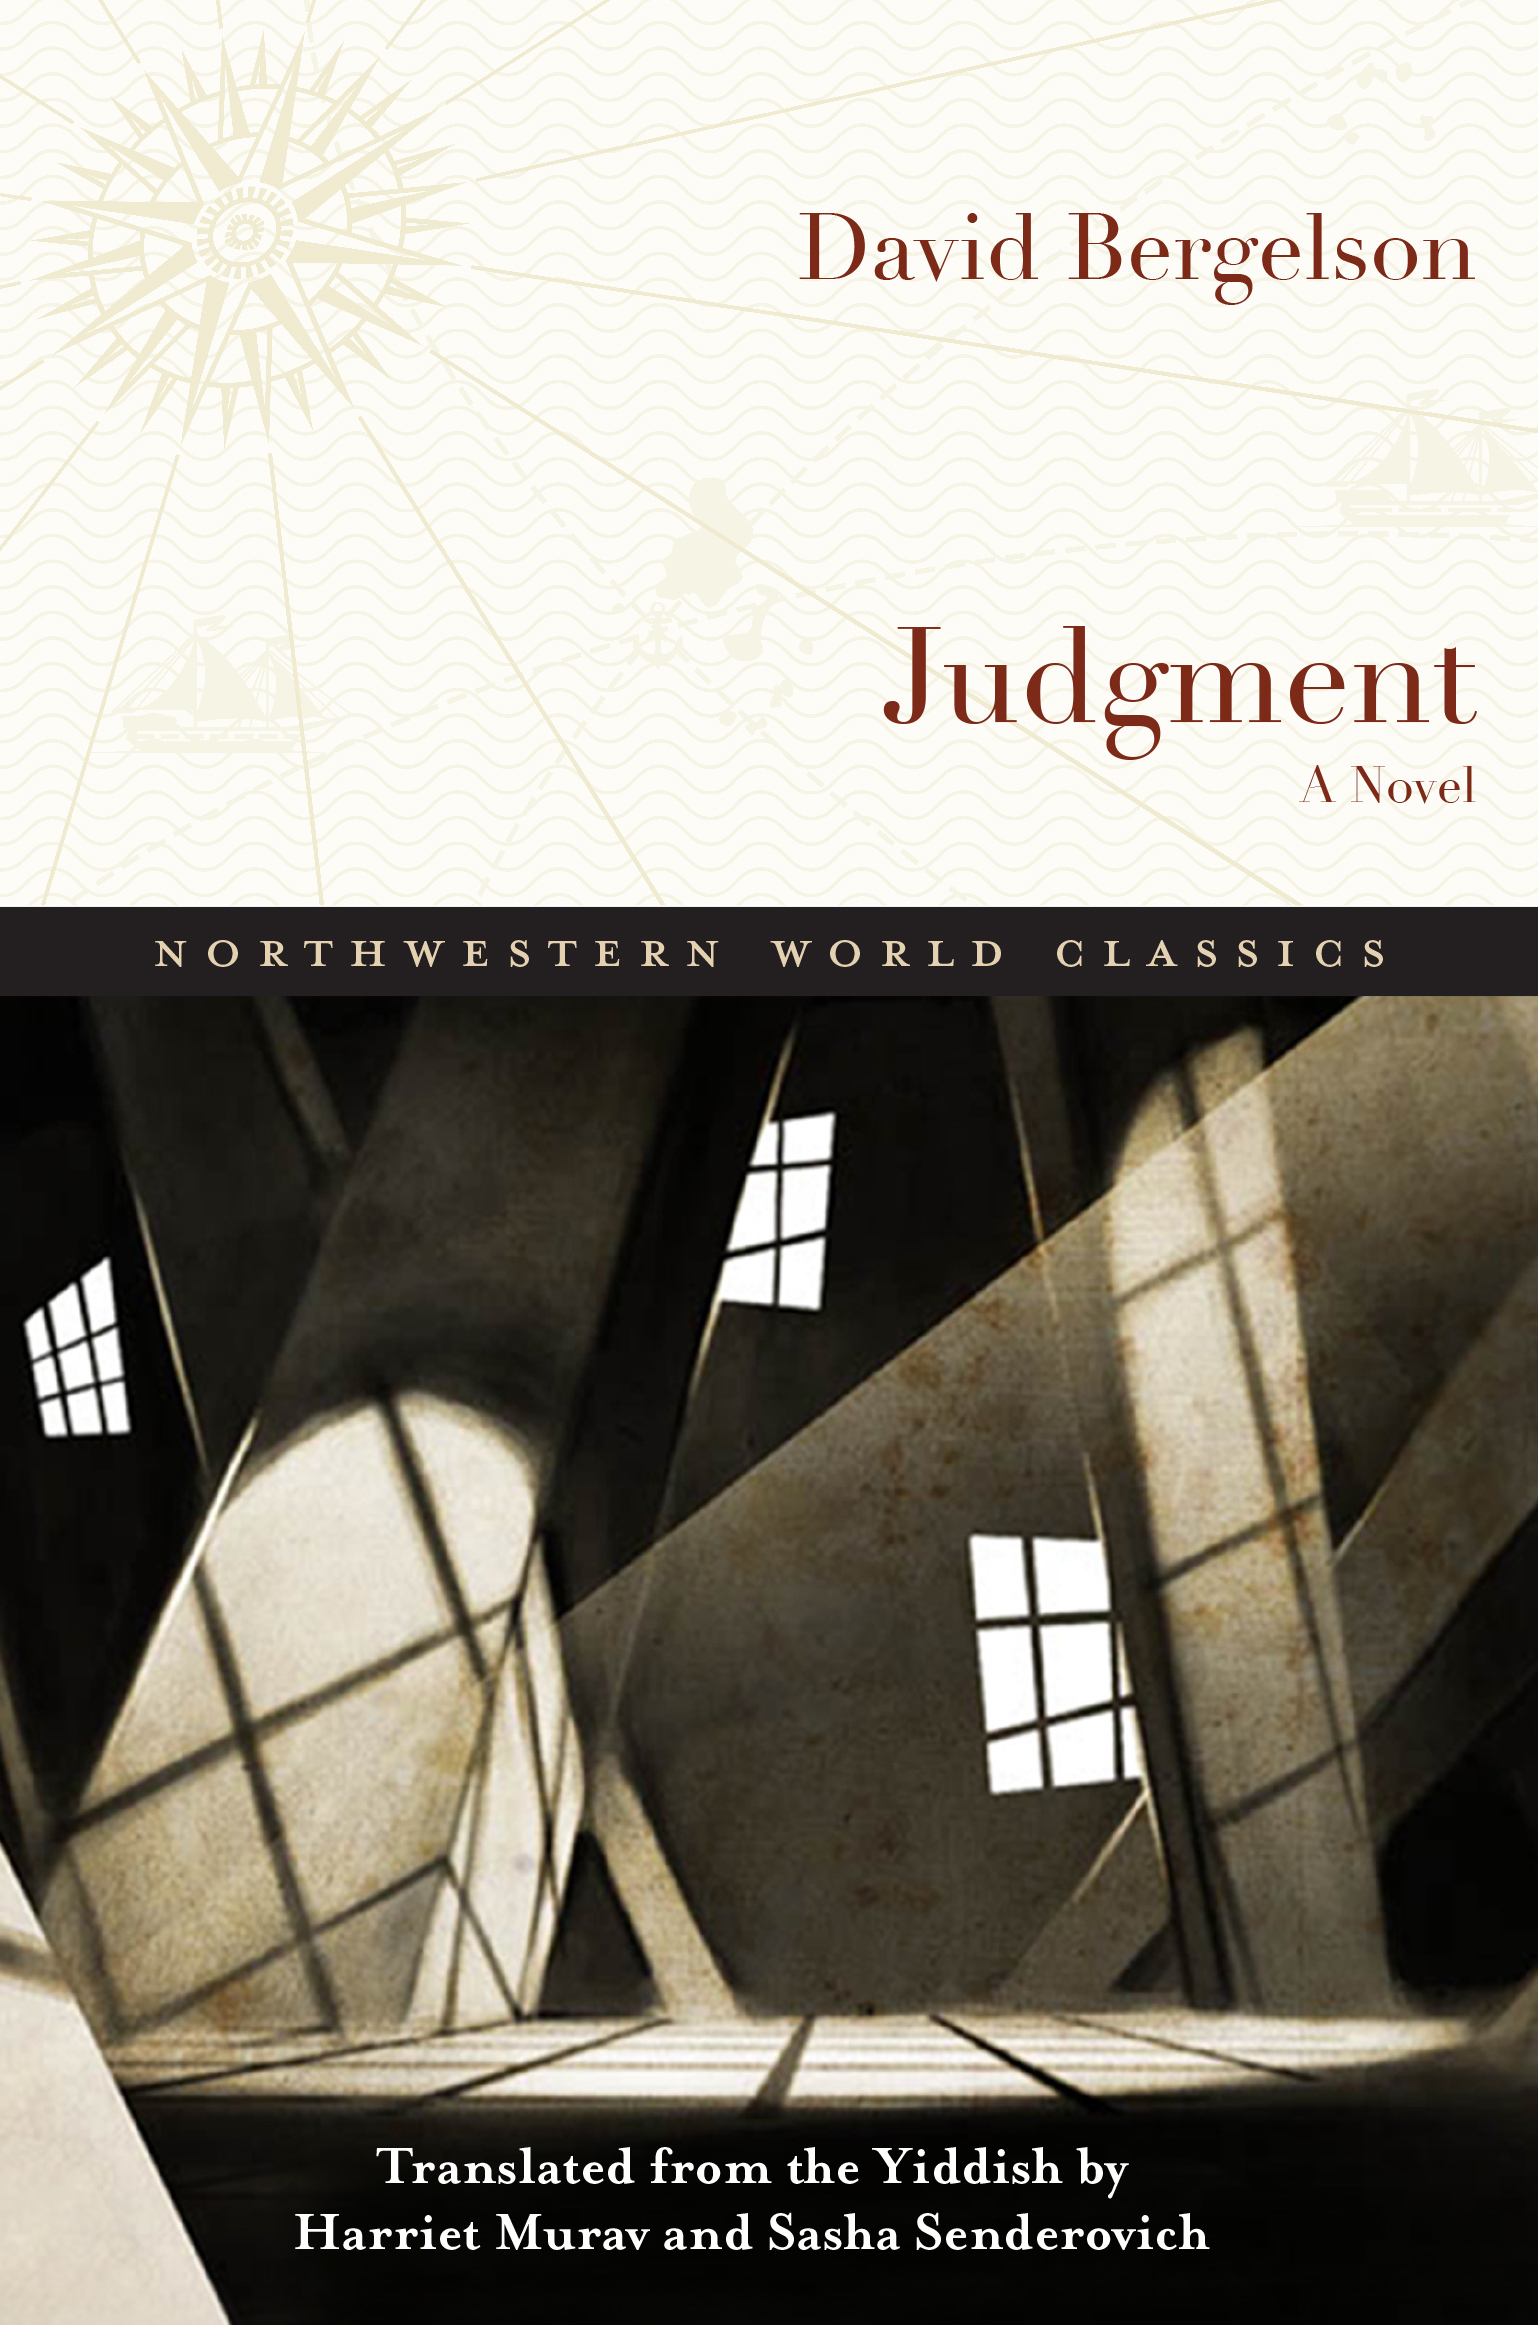 Cover of Judgment with light from several windows